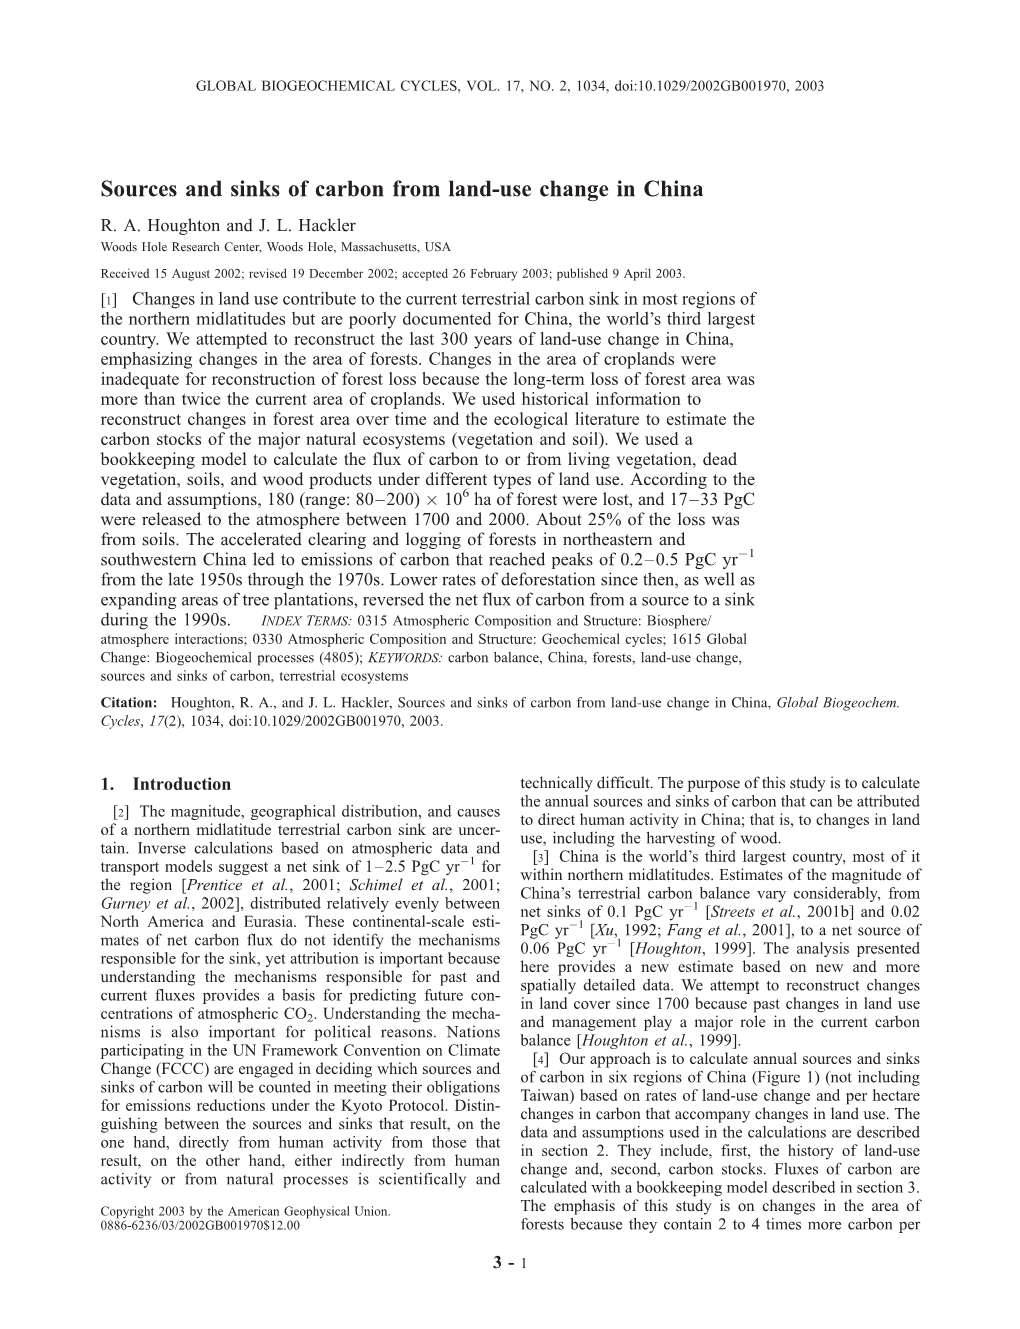 Sources and Sinks of Carbon from Land-Use Change in China R